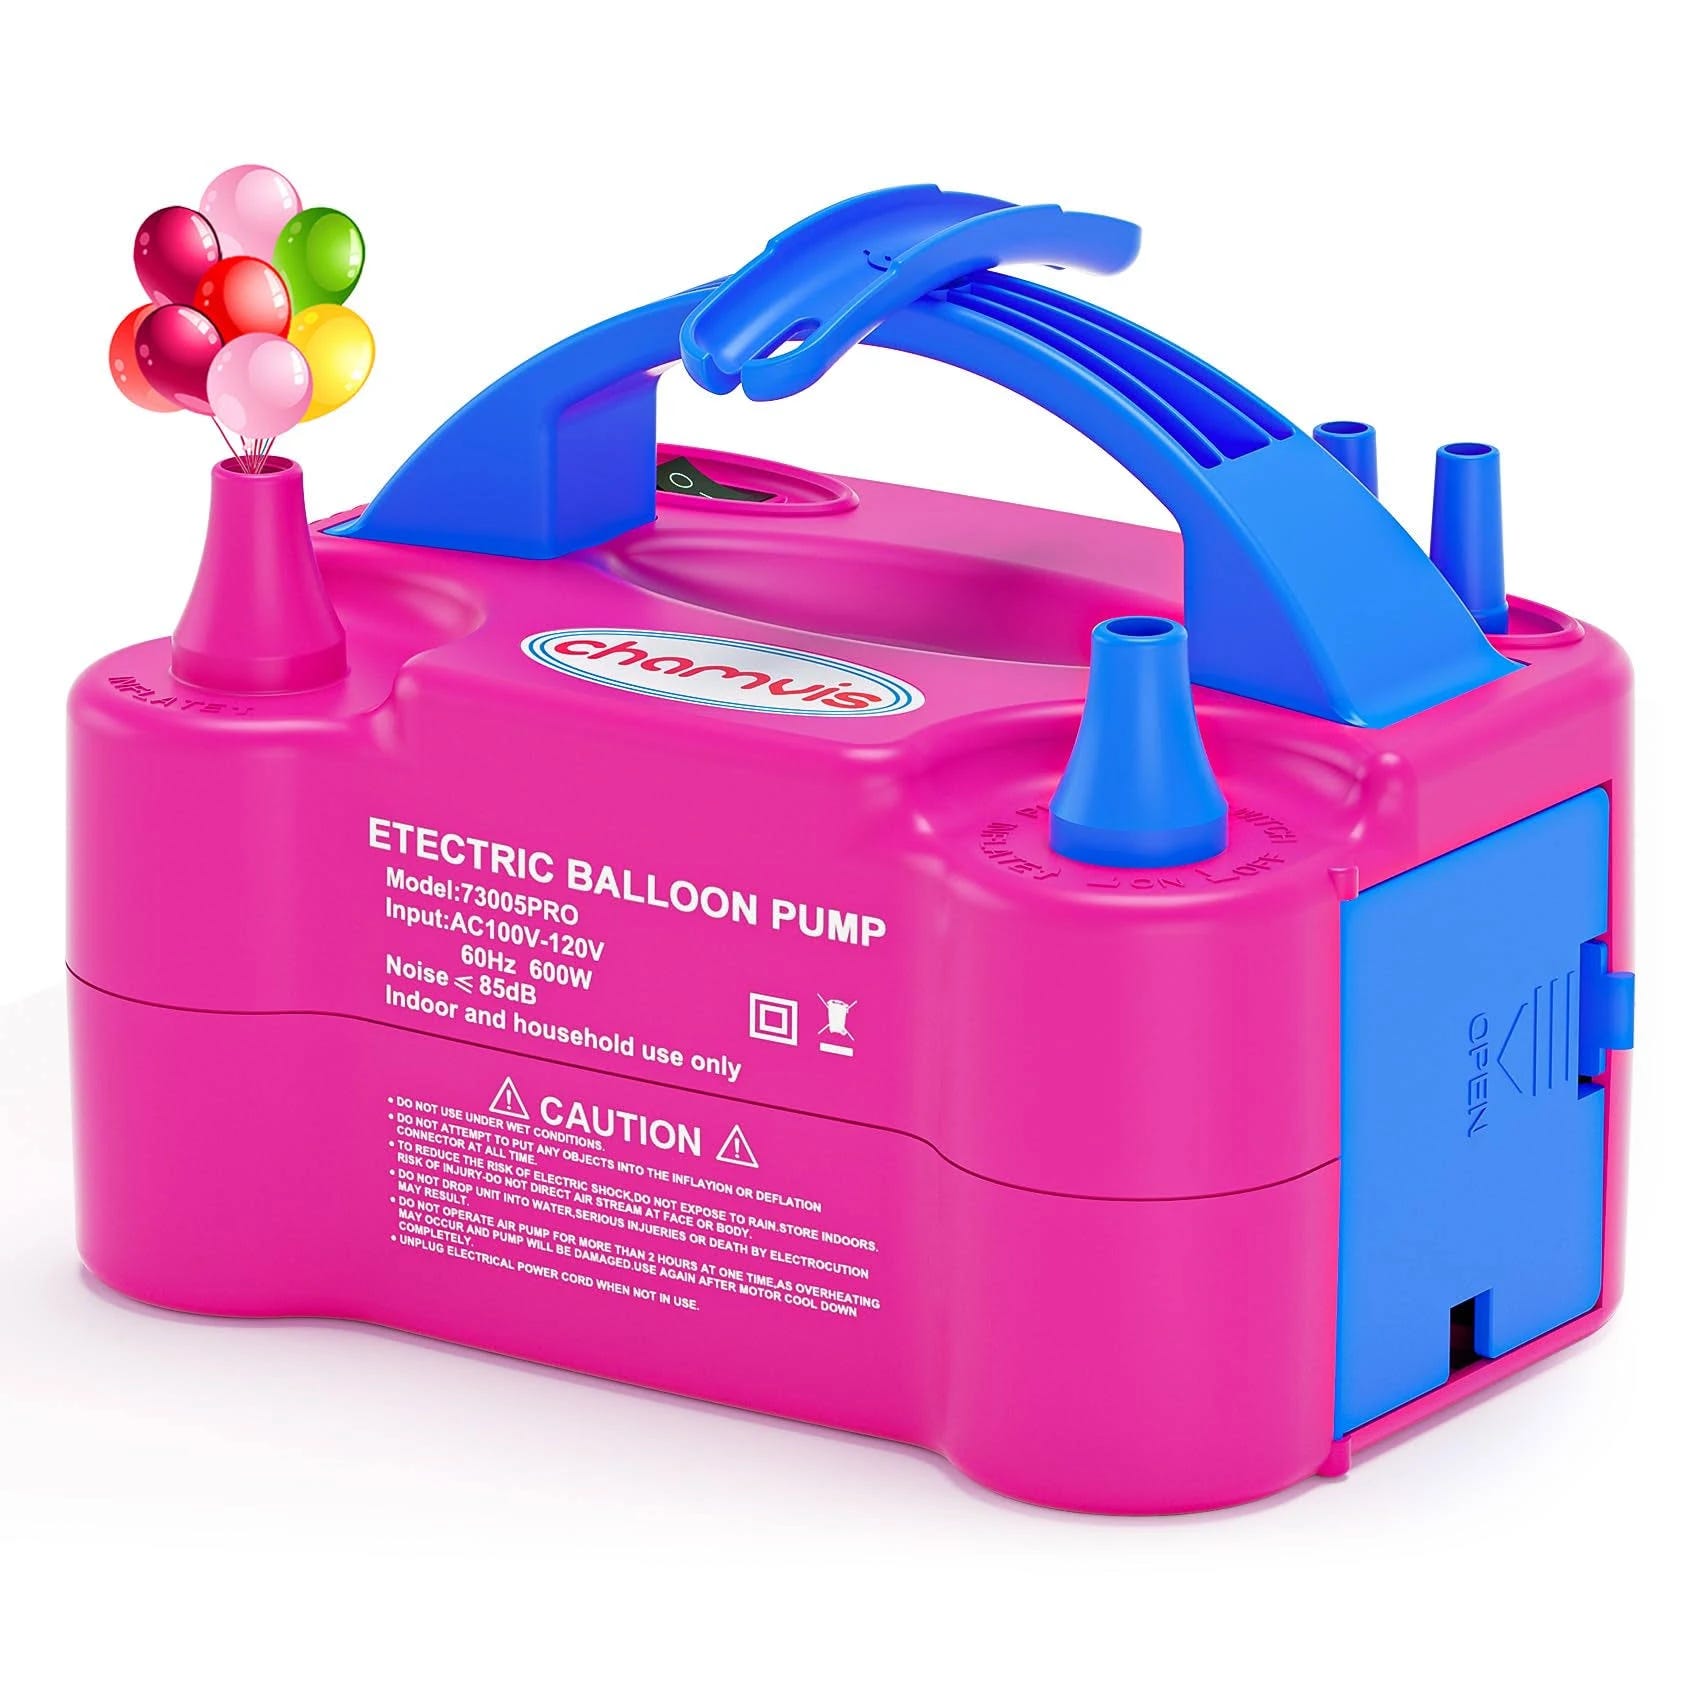 Chamvis Electric Balloon Pump - Fast and Easy Inflator for Balloons and Decorations | Image